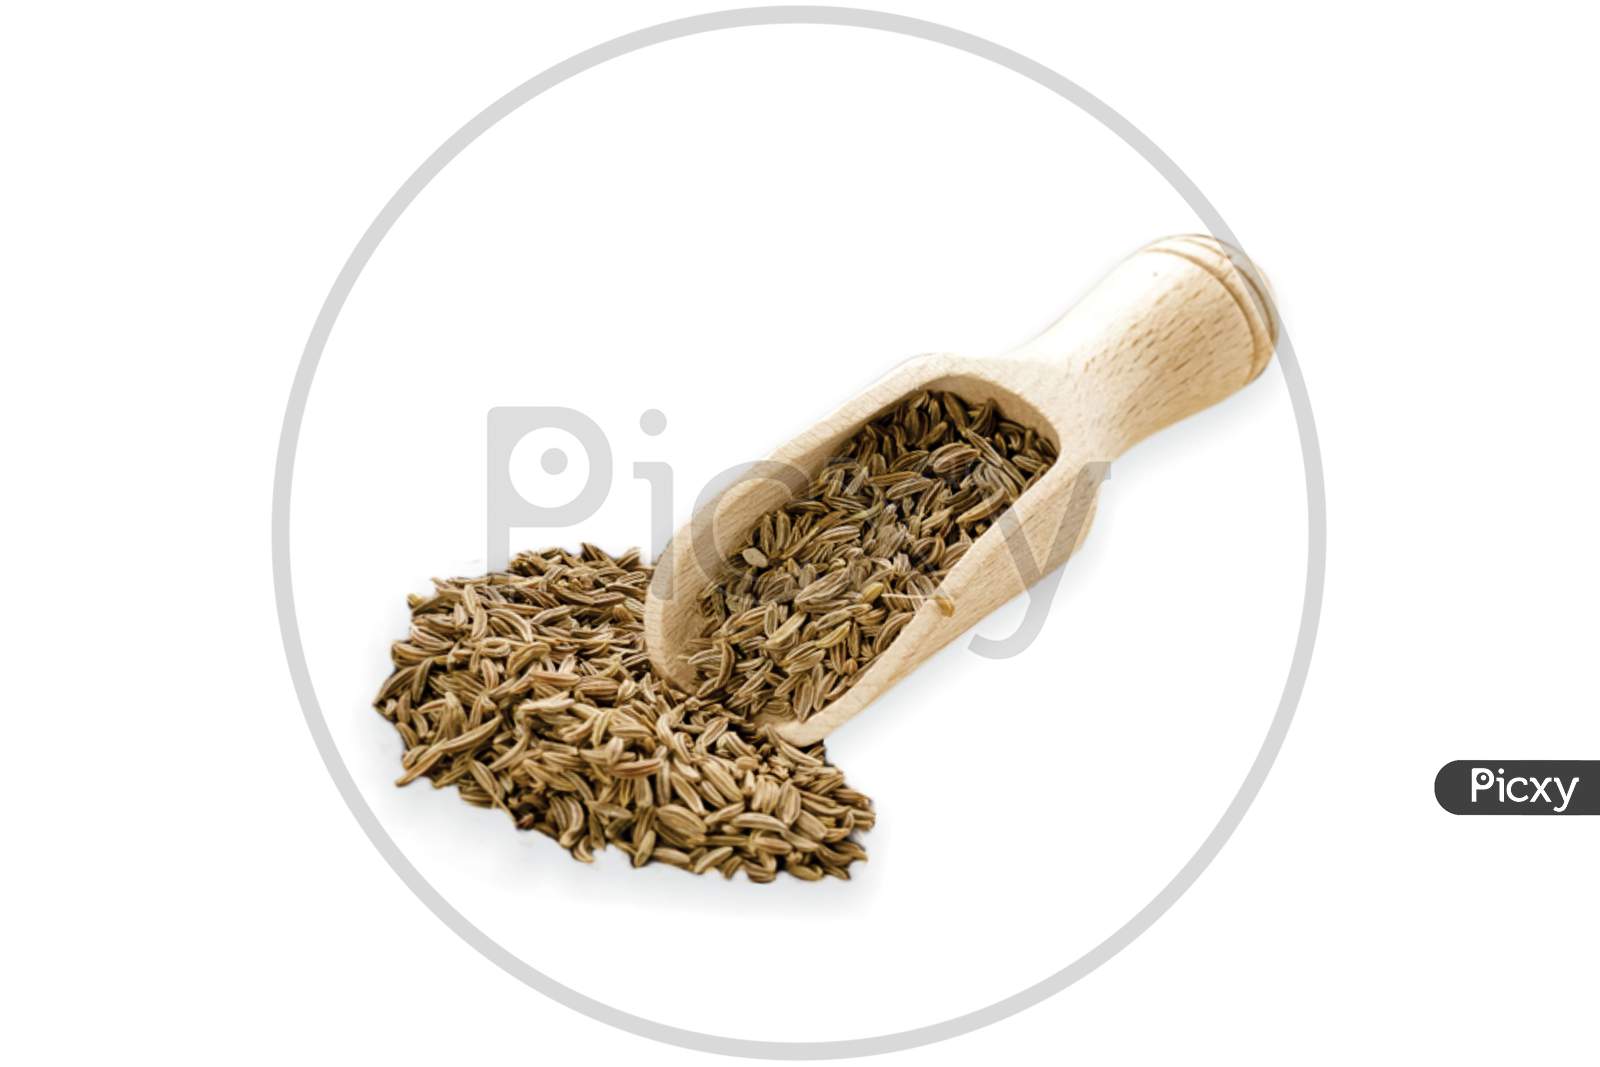 Food ingredients heap of cumin in a wooden scoop, on white background